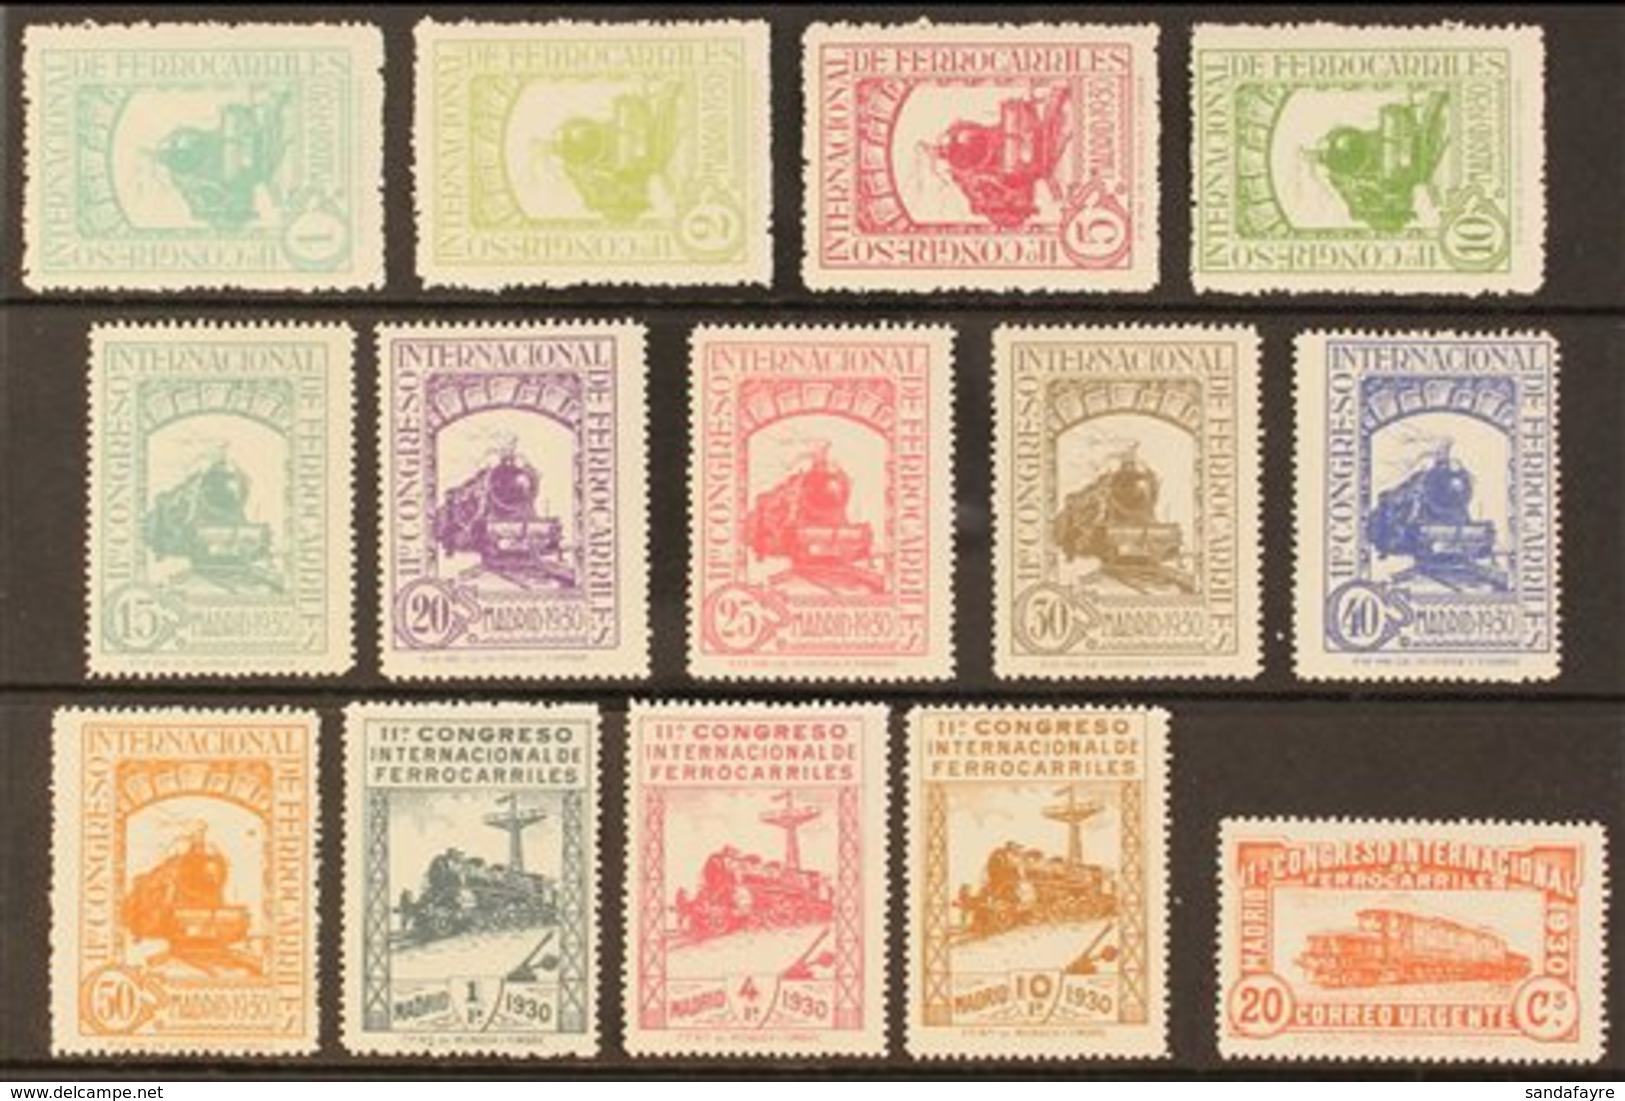 1930 Railway Congress Complete Postage Set And Express Stamp All With "A000,000" (SPECIMEN) Control Figures on Back, Edi - Other & Unclassified